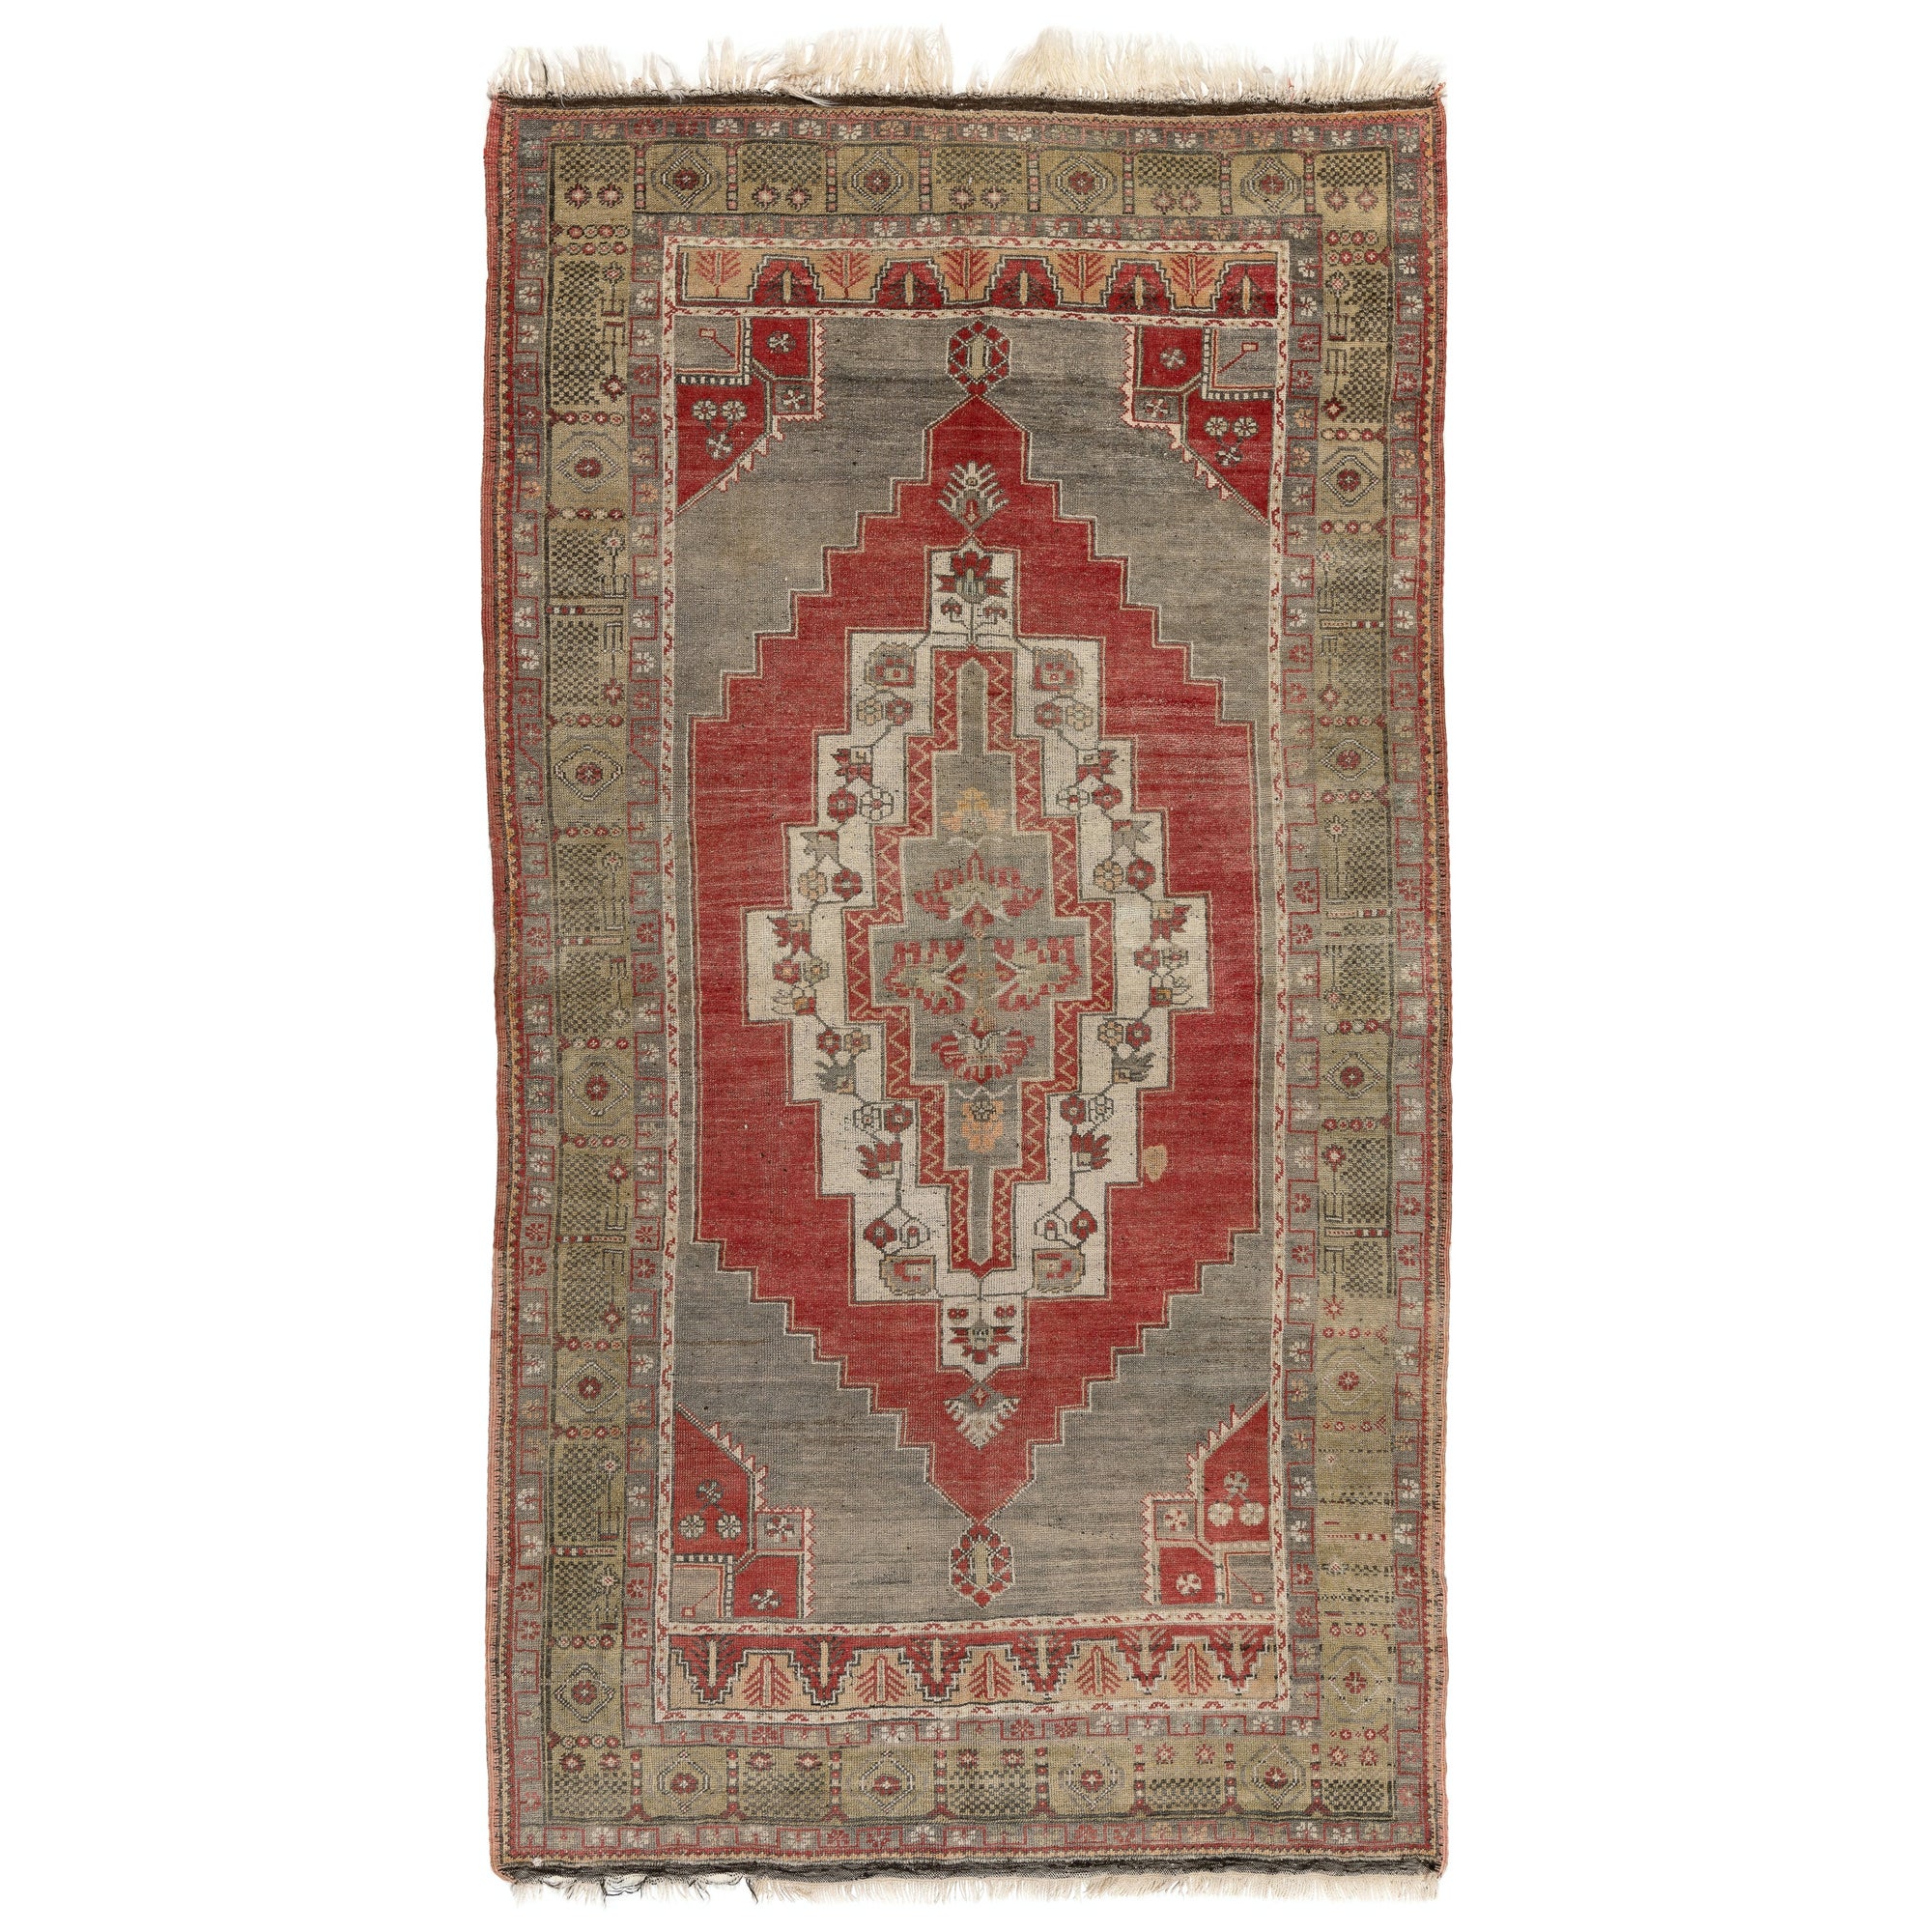 5.3x9.4 Ft Hand Knots Rugs Vintage Anatolian Area Rug with Tribal Style. 100% laine en vente